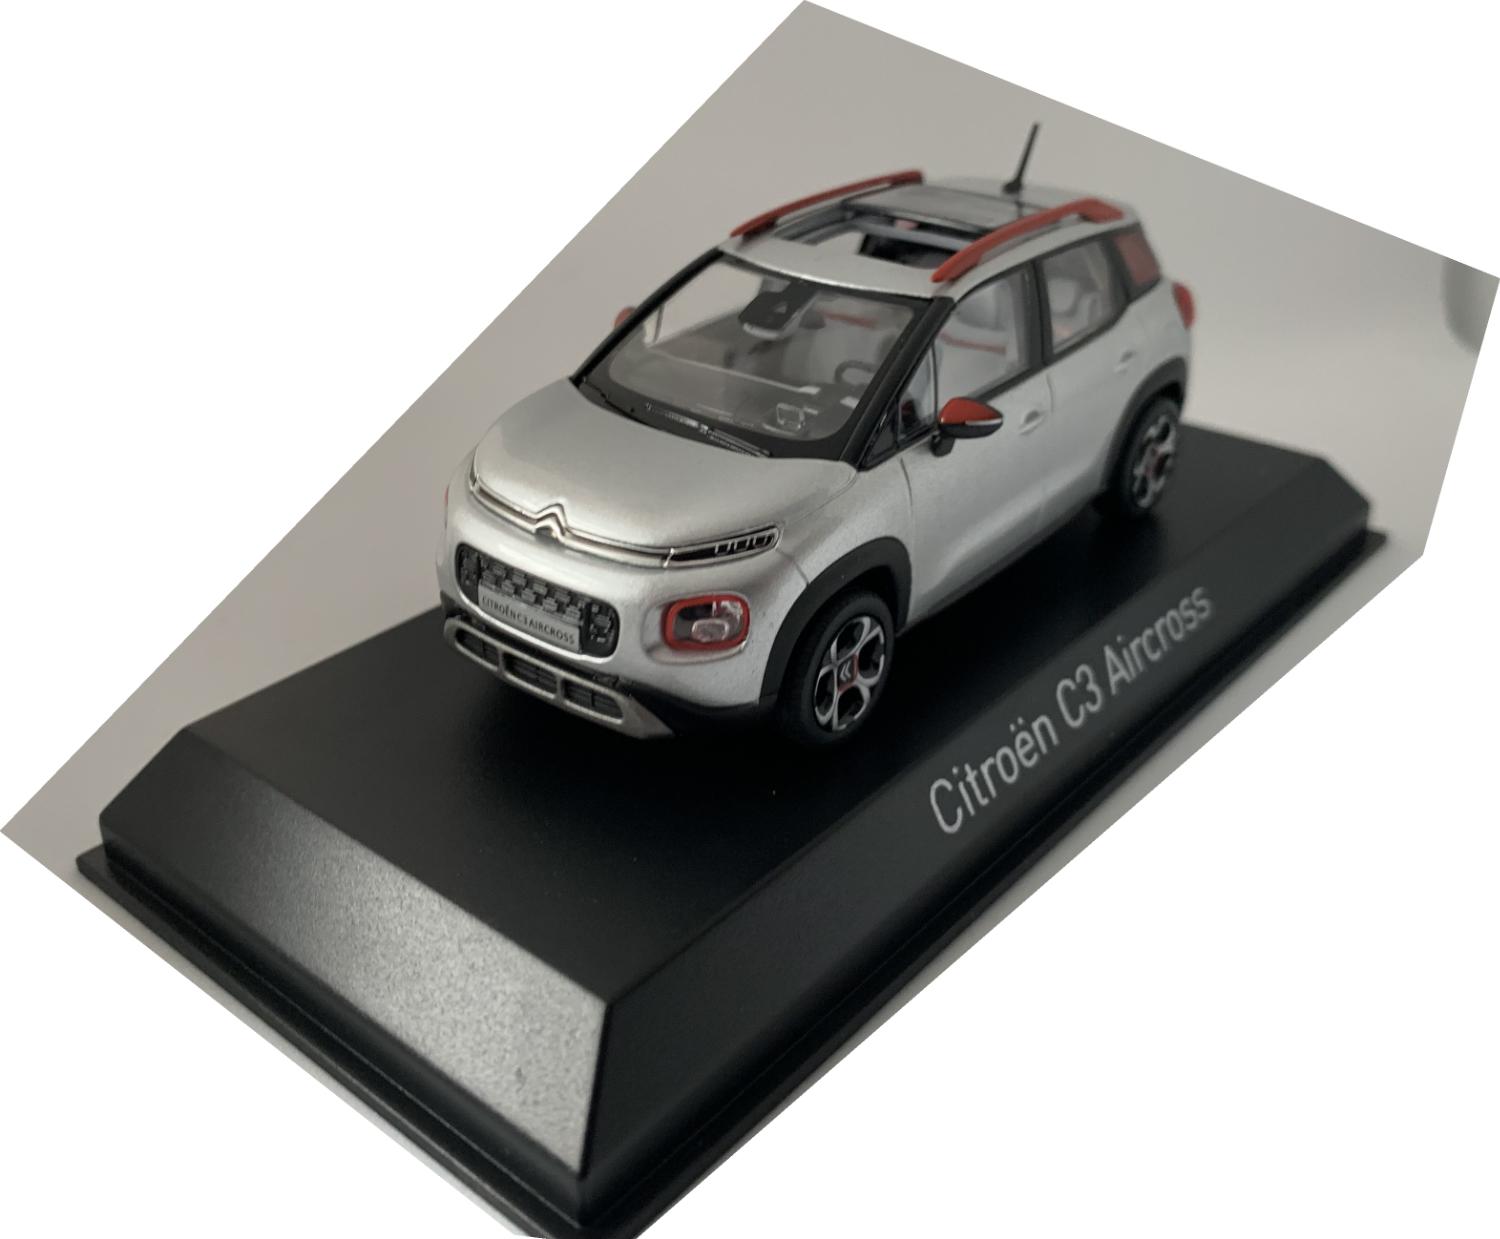 An excellent reproduction of the Citroen C3 Aircross with detail throughout, all authentically recreated. Model is mounted on a removable plinth with a removable hard plastic cover